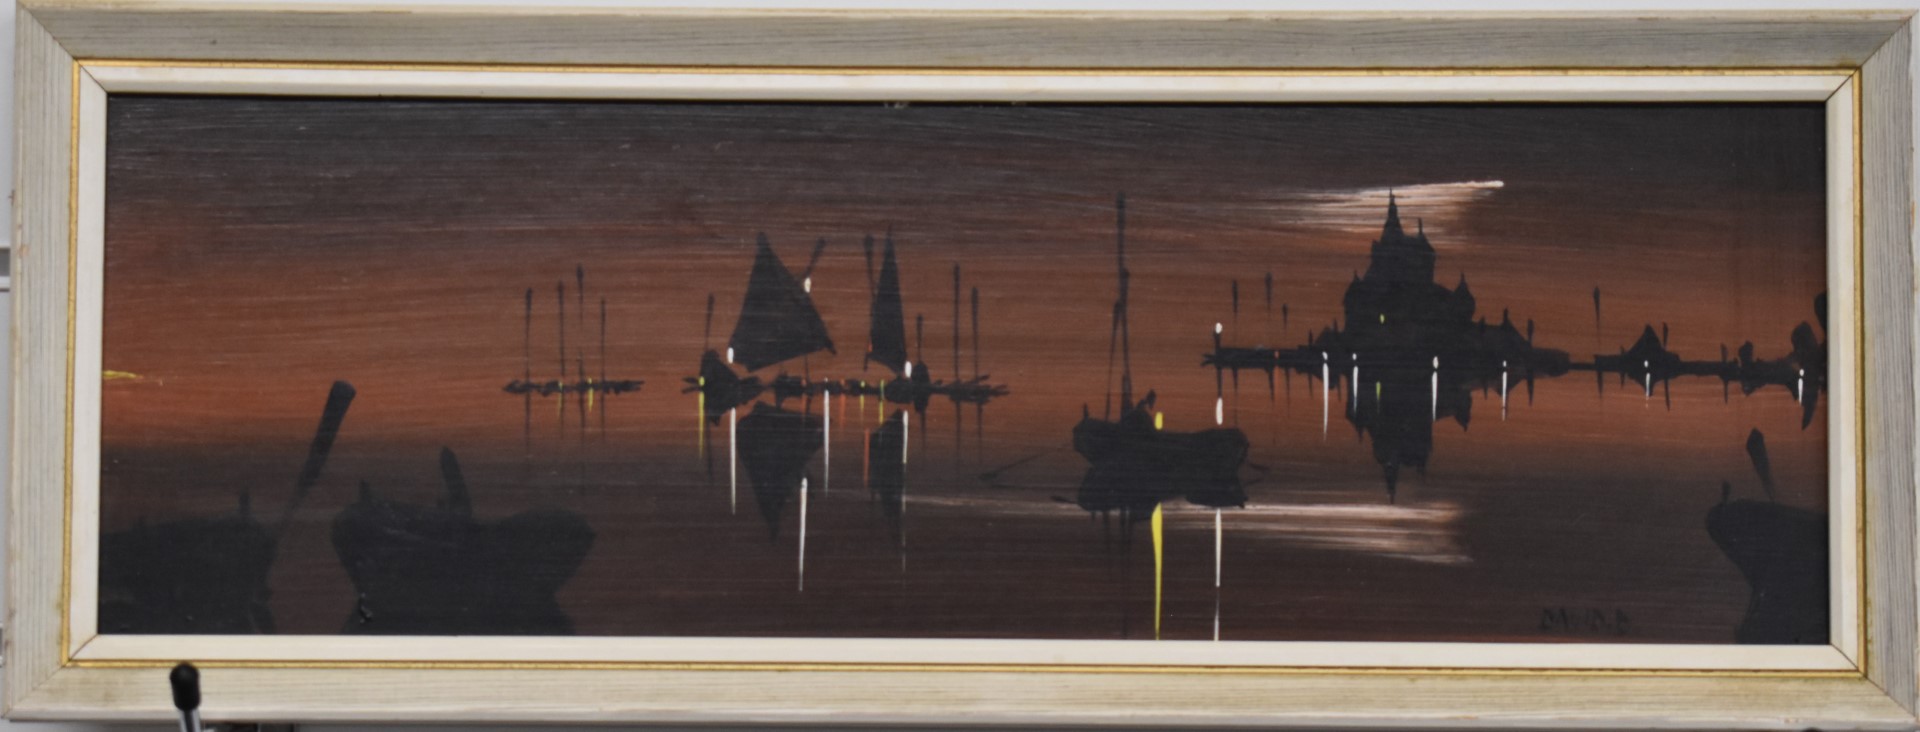 George Richard Deakins (1911-1982) oil on canvas coastal scene with boats at sunset and another - Image 5 of 9